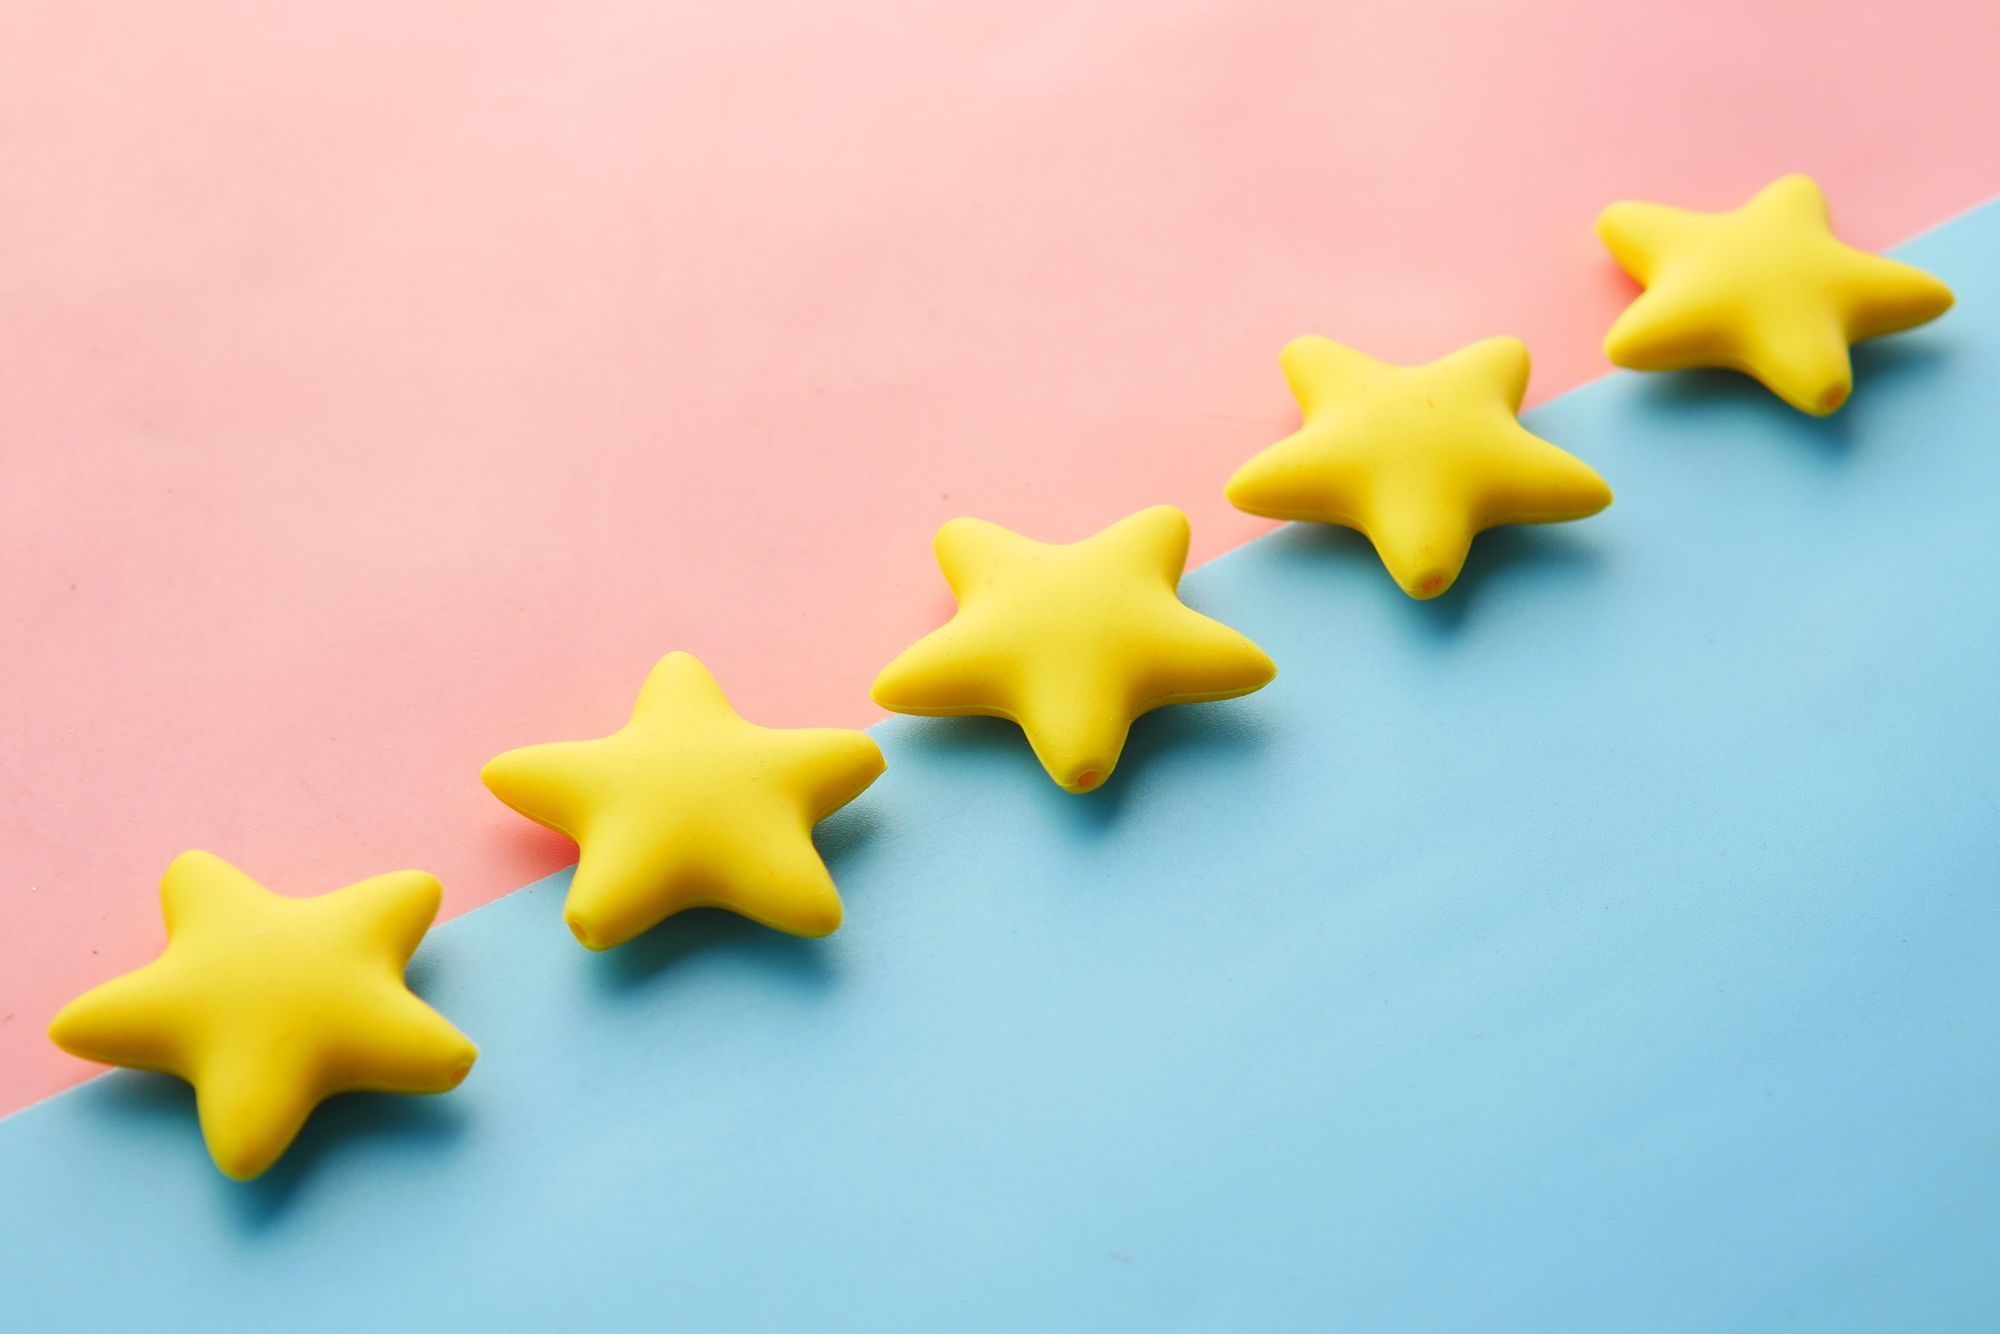 Image shows five gold stars against in the middle of a pink and blue background